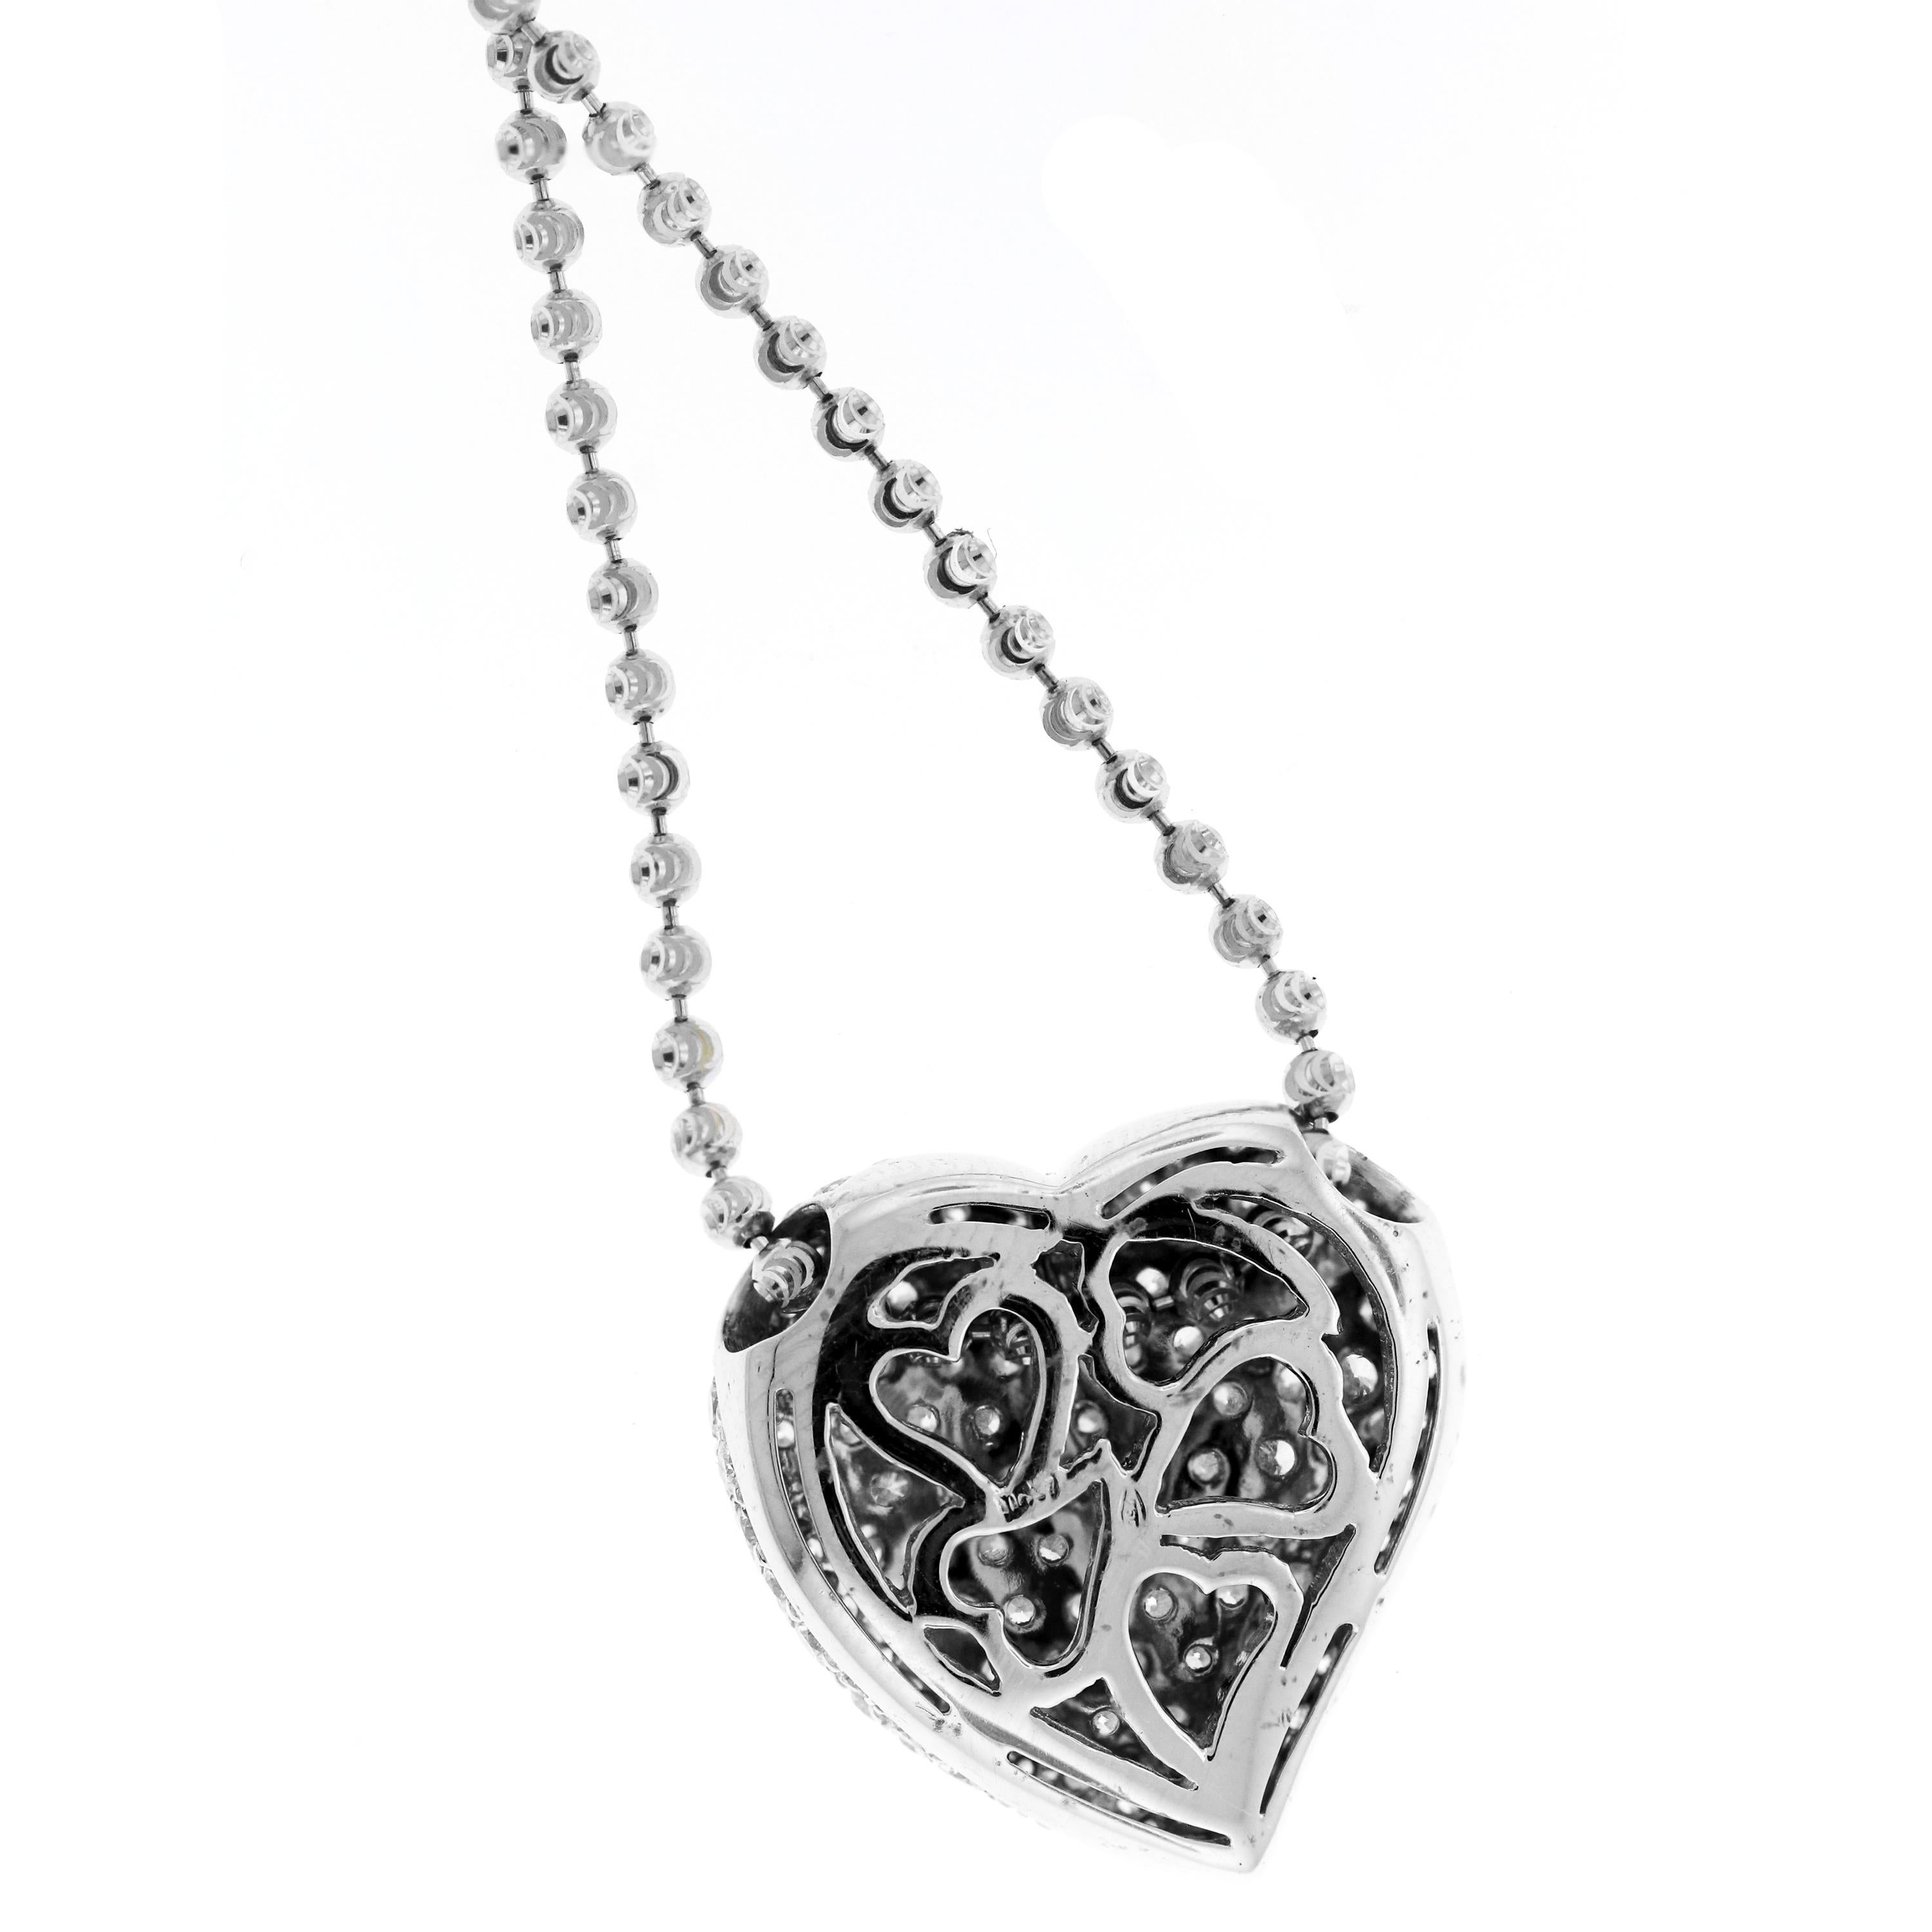 IF YOU ARE REALLY INTERESTED, CONTACT US WITH ANY REASONABLE OFFER. WE WILL TRY OUR BEST TO MAKE YOU HAPPY!

18K White Gold and Diamond Curved Heart Pendant Necklace with Ball Chain

Heart Pendant has 3 carat G color, VS clarity diamonds

Pendant is